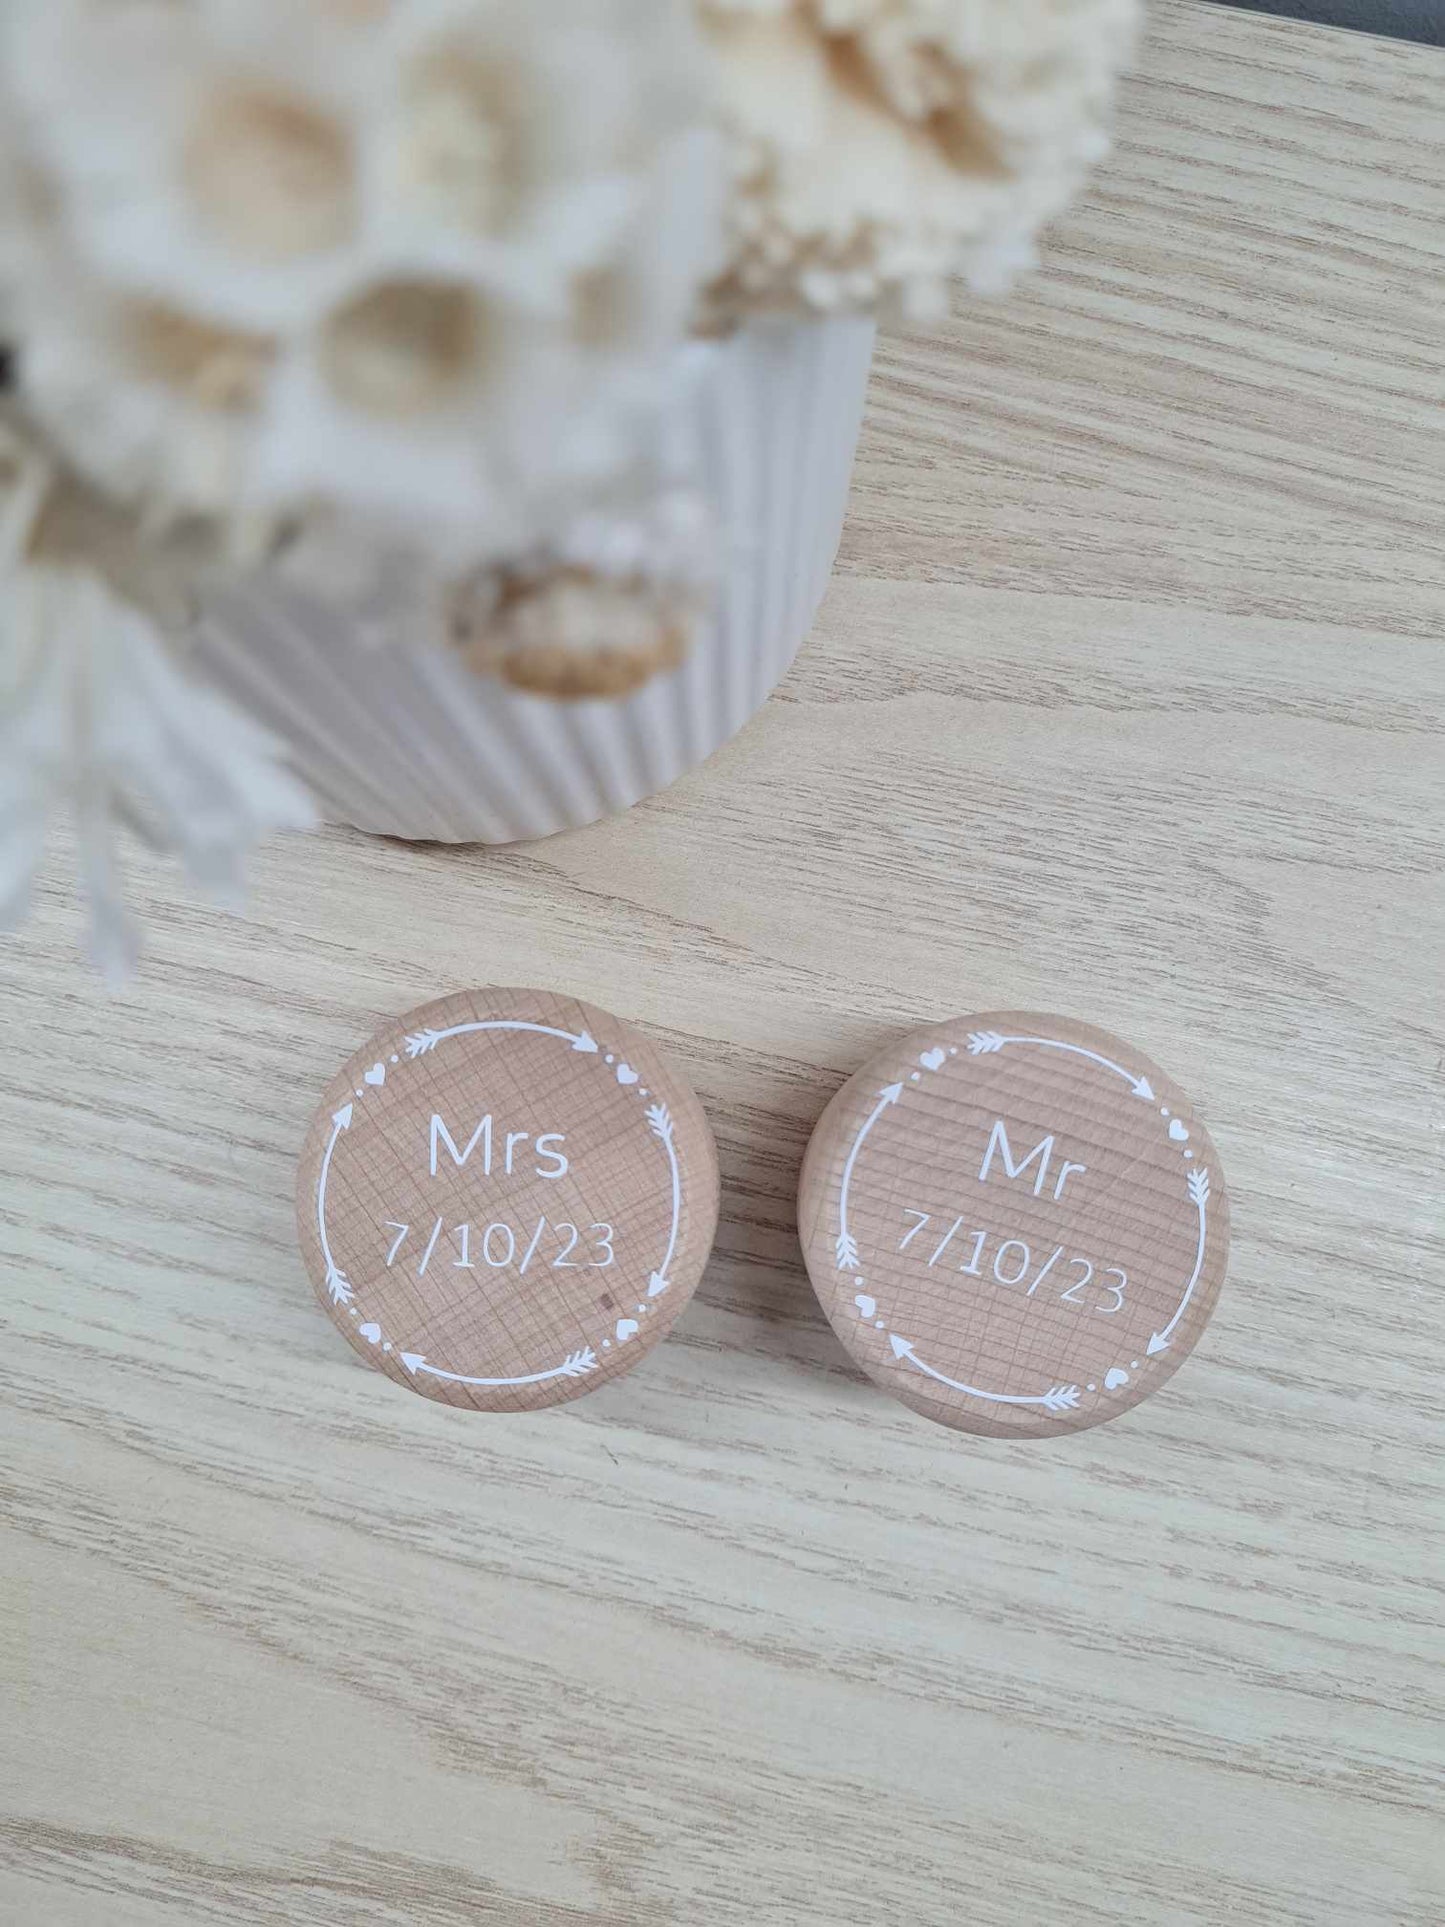 Mr/ Mrs Ring Box (Date) with Arrow Design